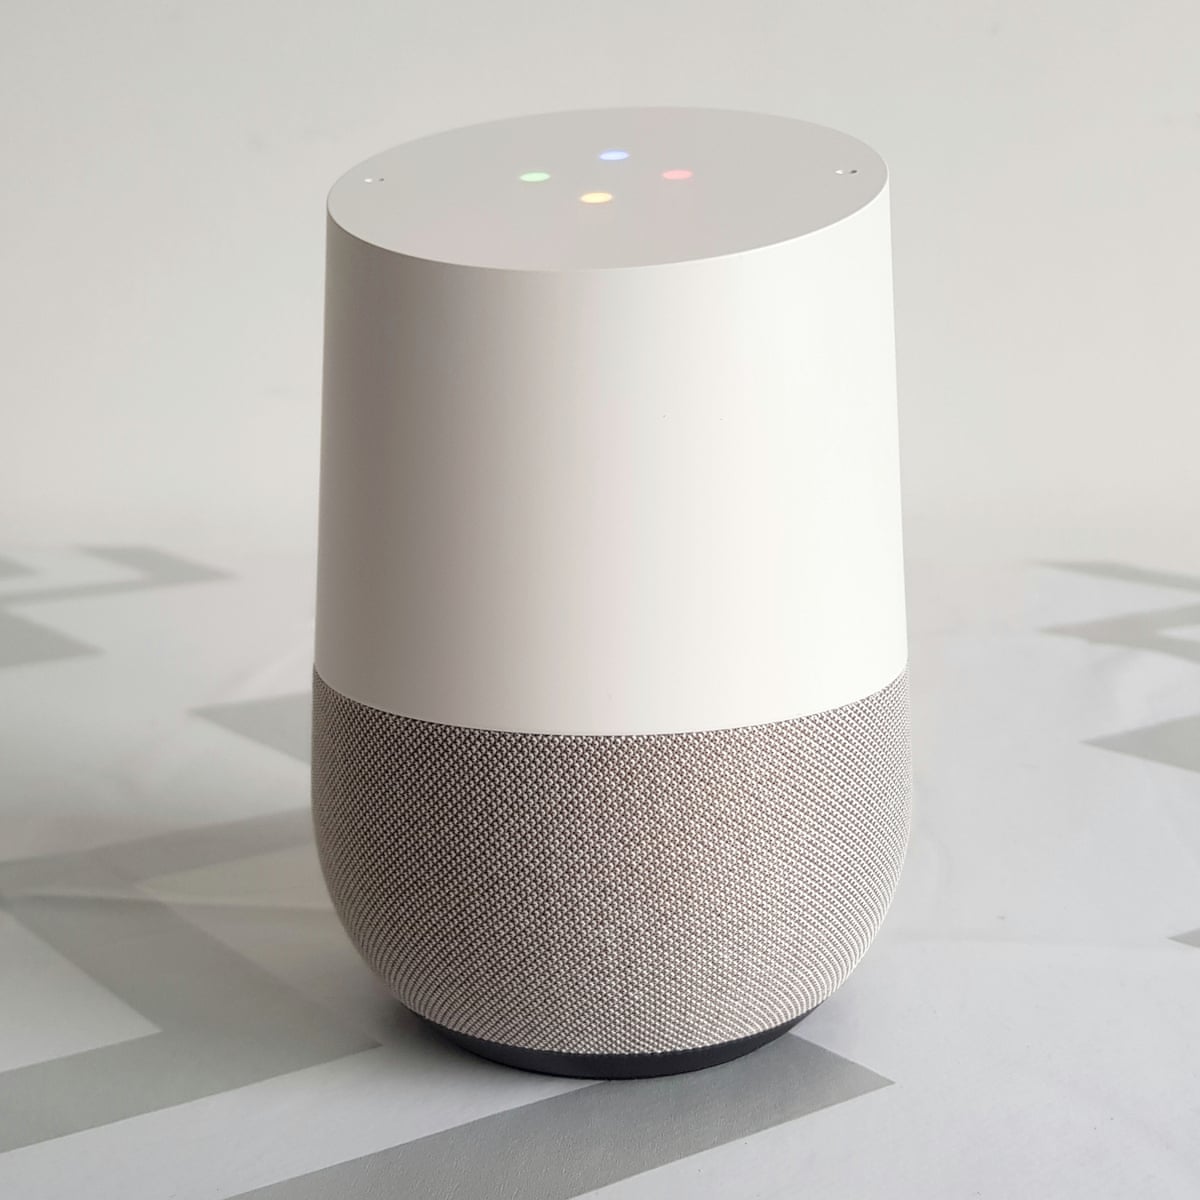 Google Home Review: The Smart Speaker That Answers Almost Any Question |  Google | The Guardian